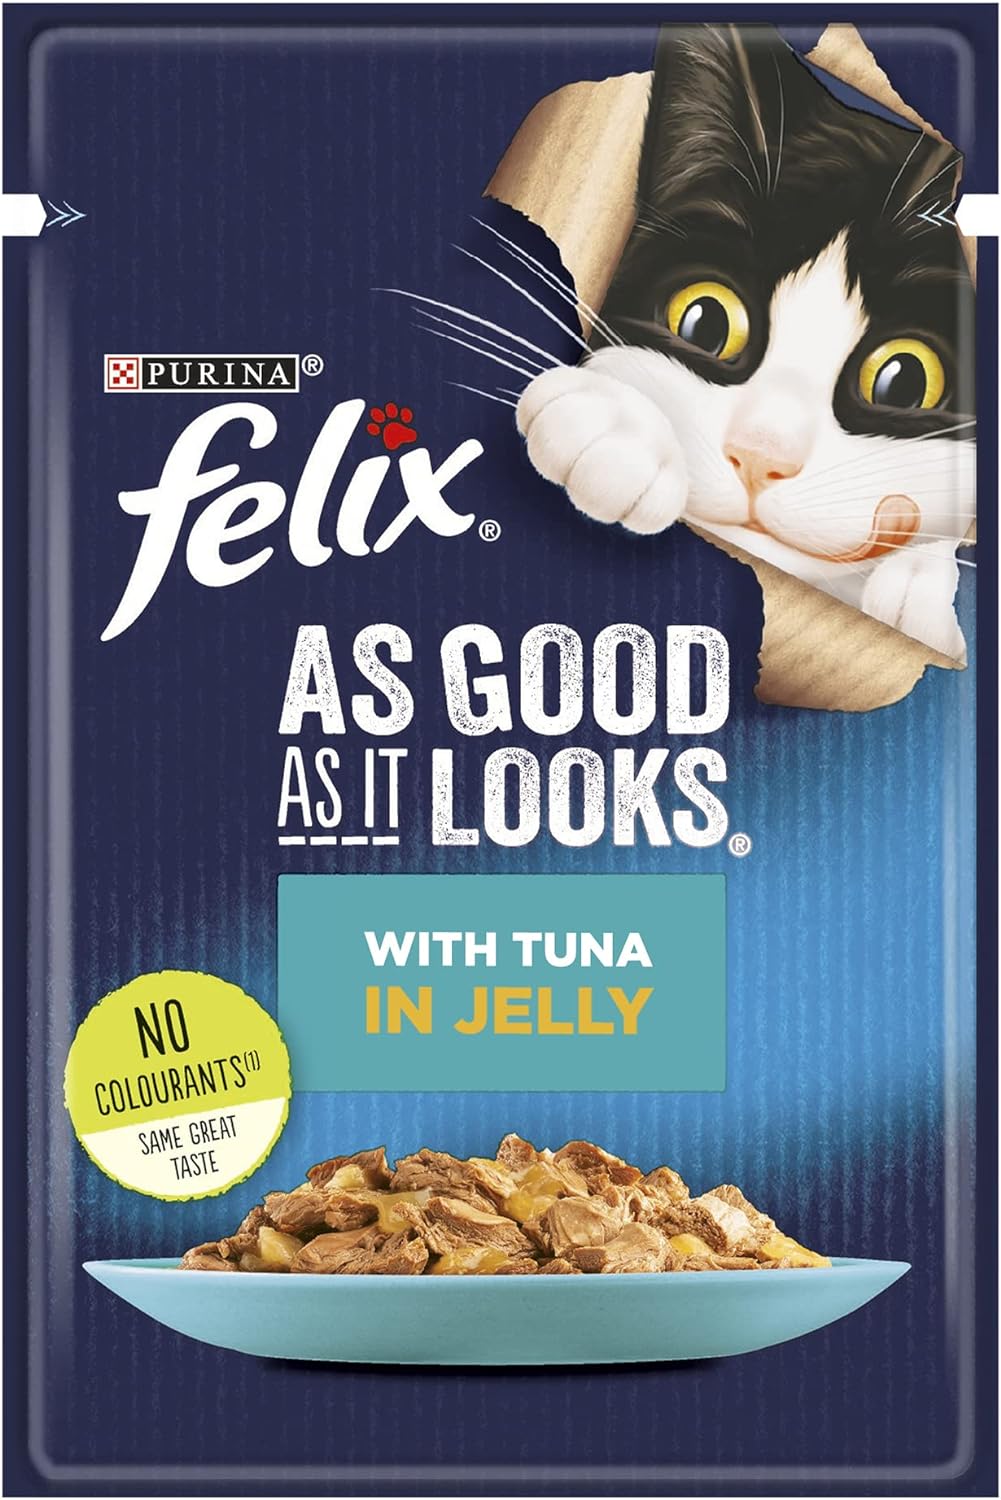 Felix Purina Naturally Delicious Countryside Selection in Jelly Wet Cat Food, 85g (12 Pouches)